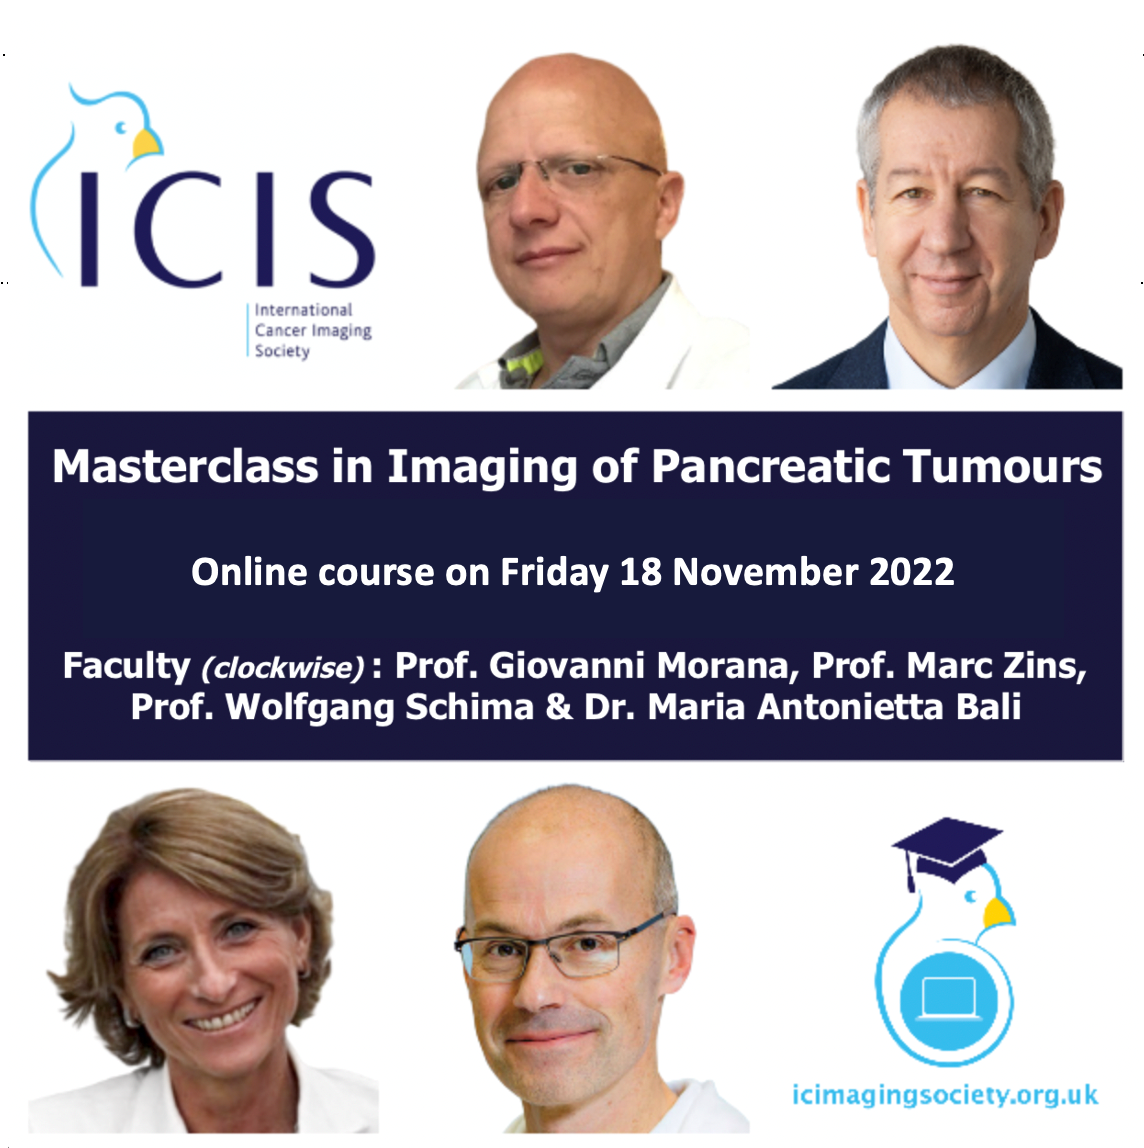 Masterclass in Imaging of Pancreatic Tumours